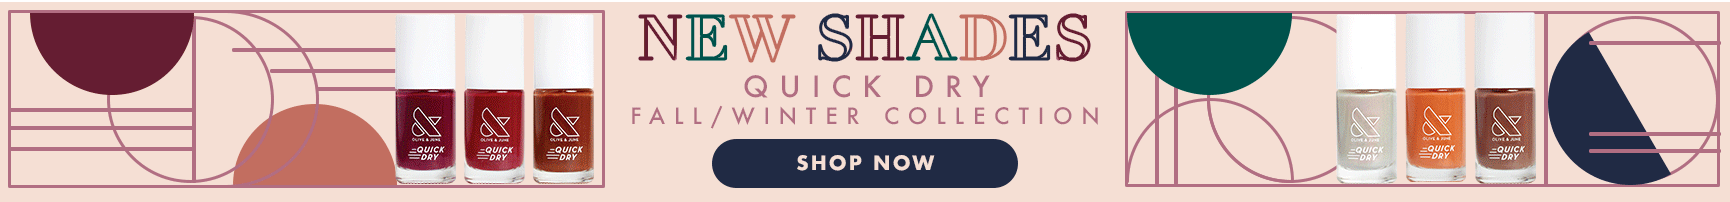 New Shades quick dry fall / winter collection - shop now